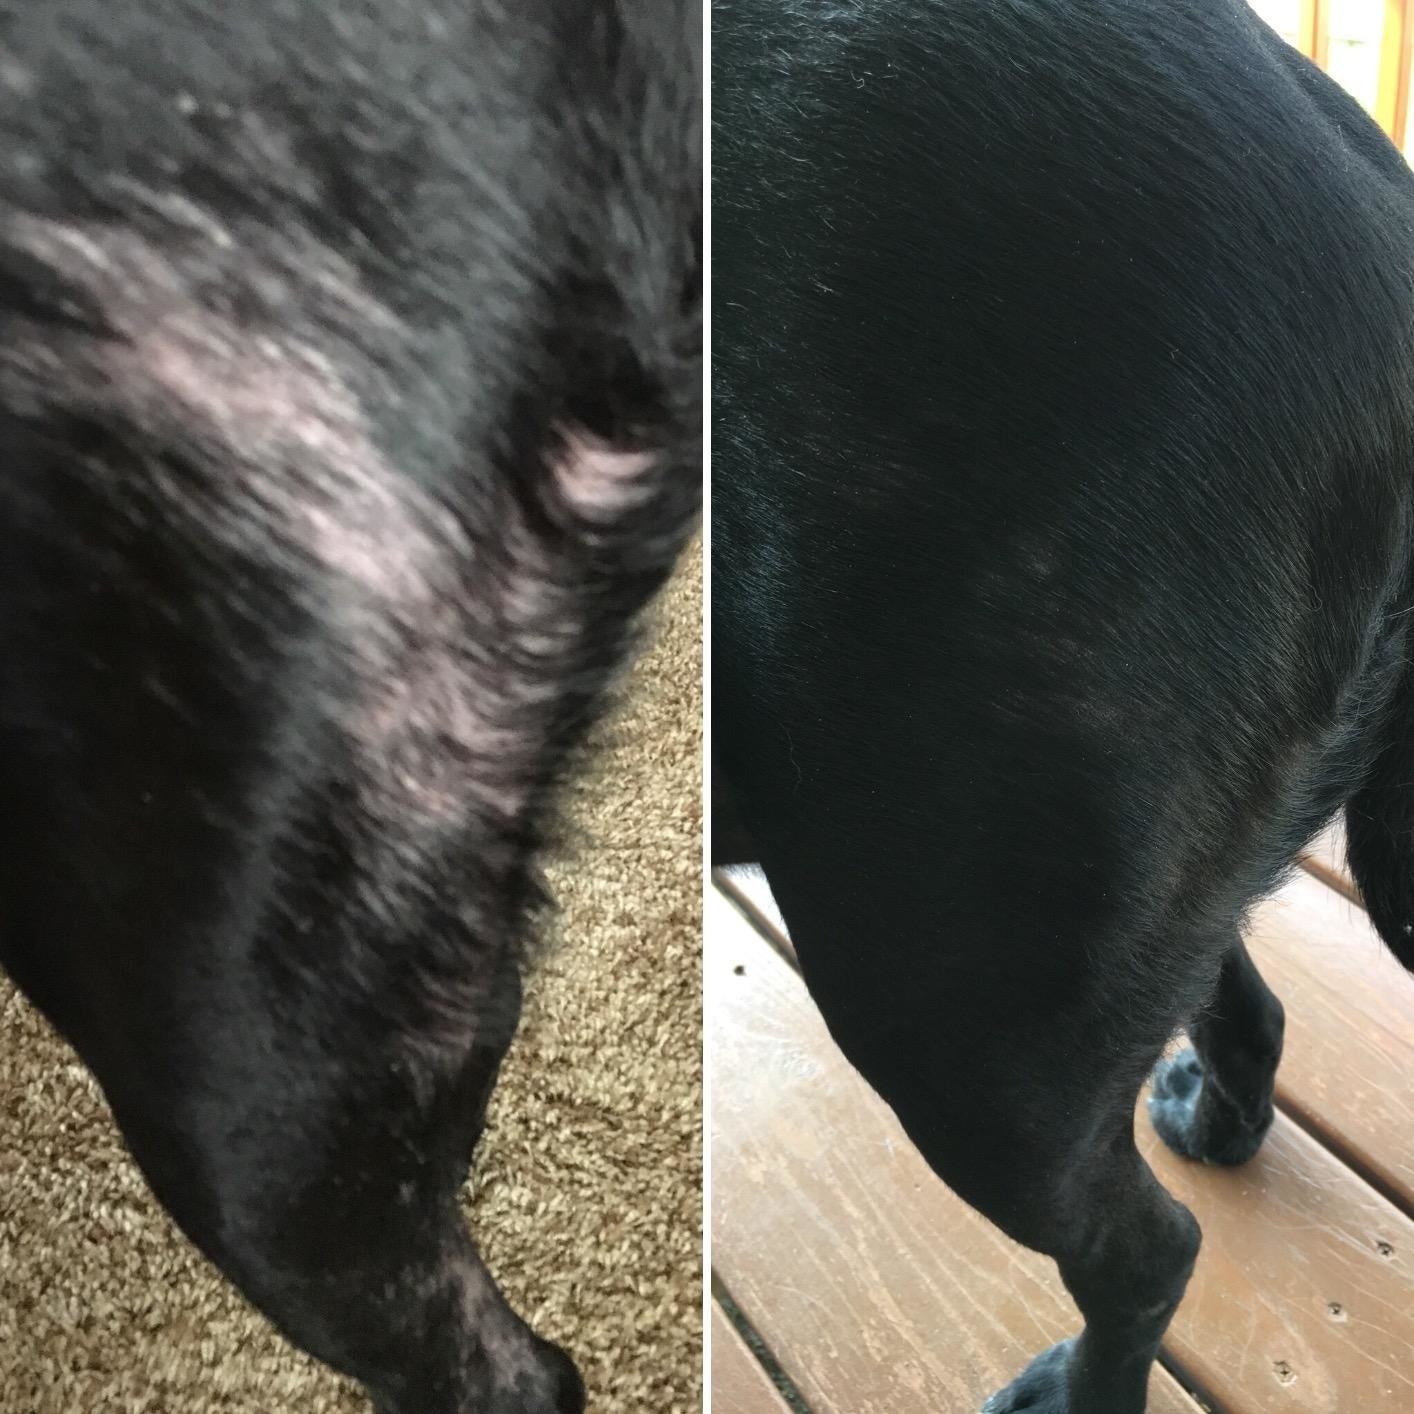 Reviewer before and after showing the allergy supplements helped treat their dog's bald patches